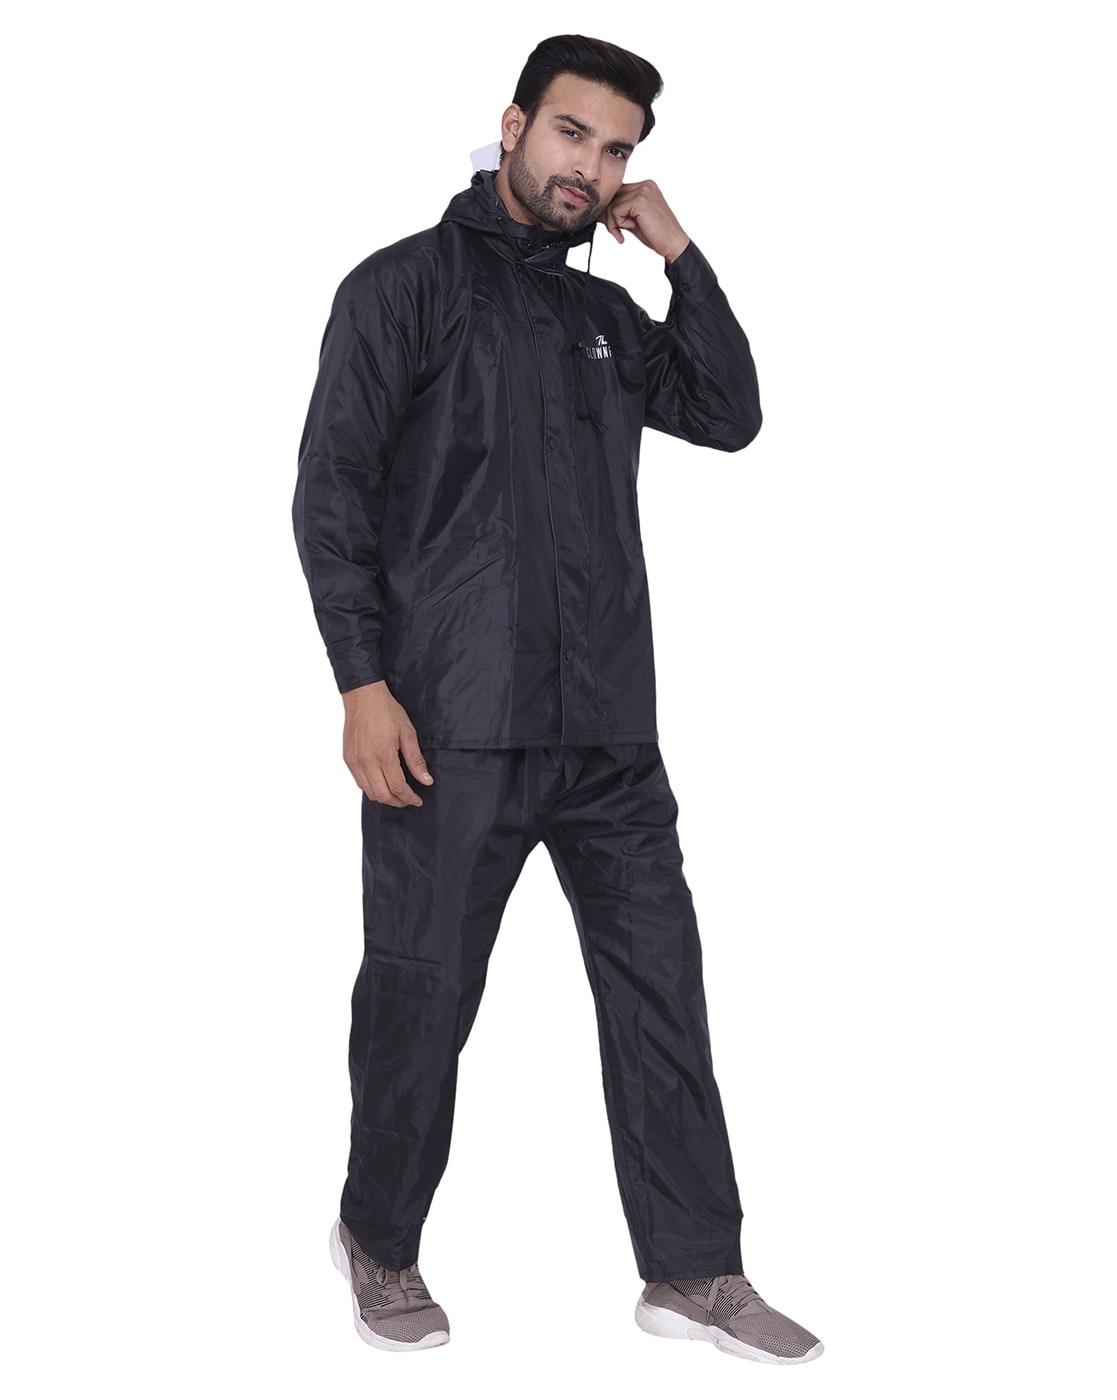 Buy Opener Black Pro Rainwear and Windcheaters for Men by THE